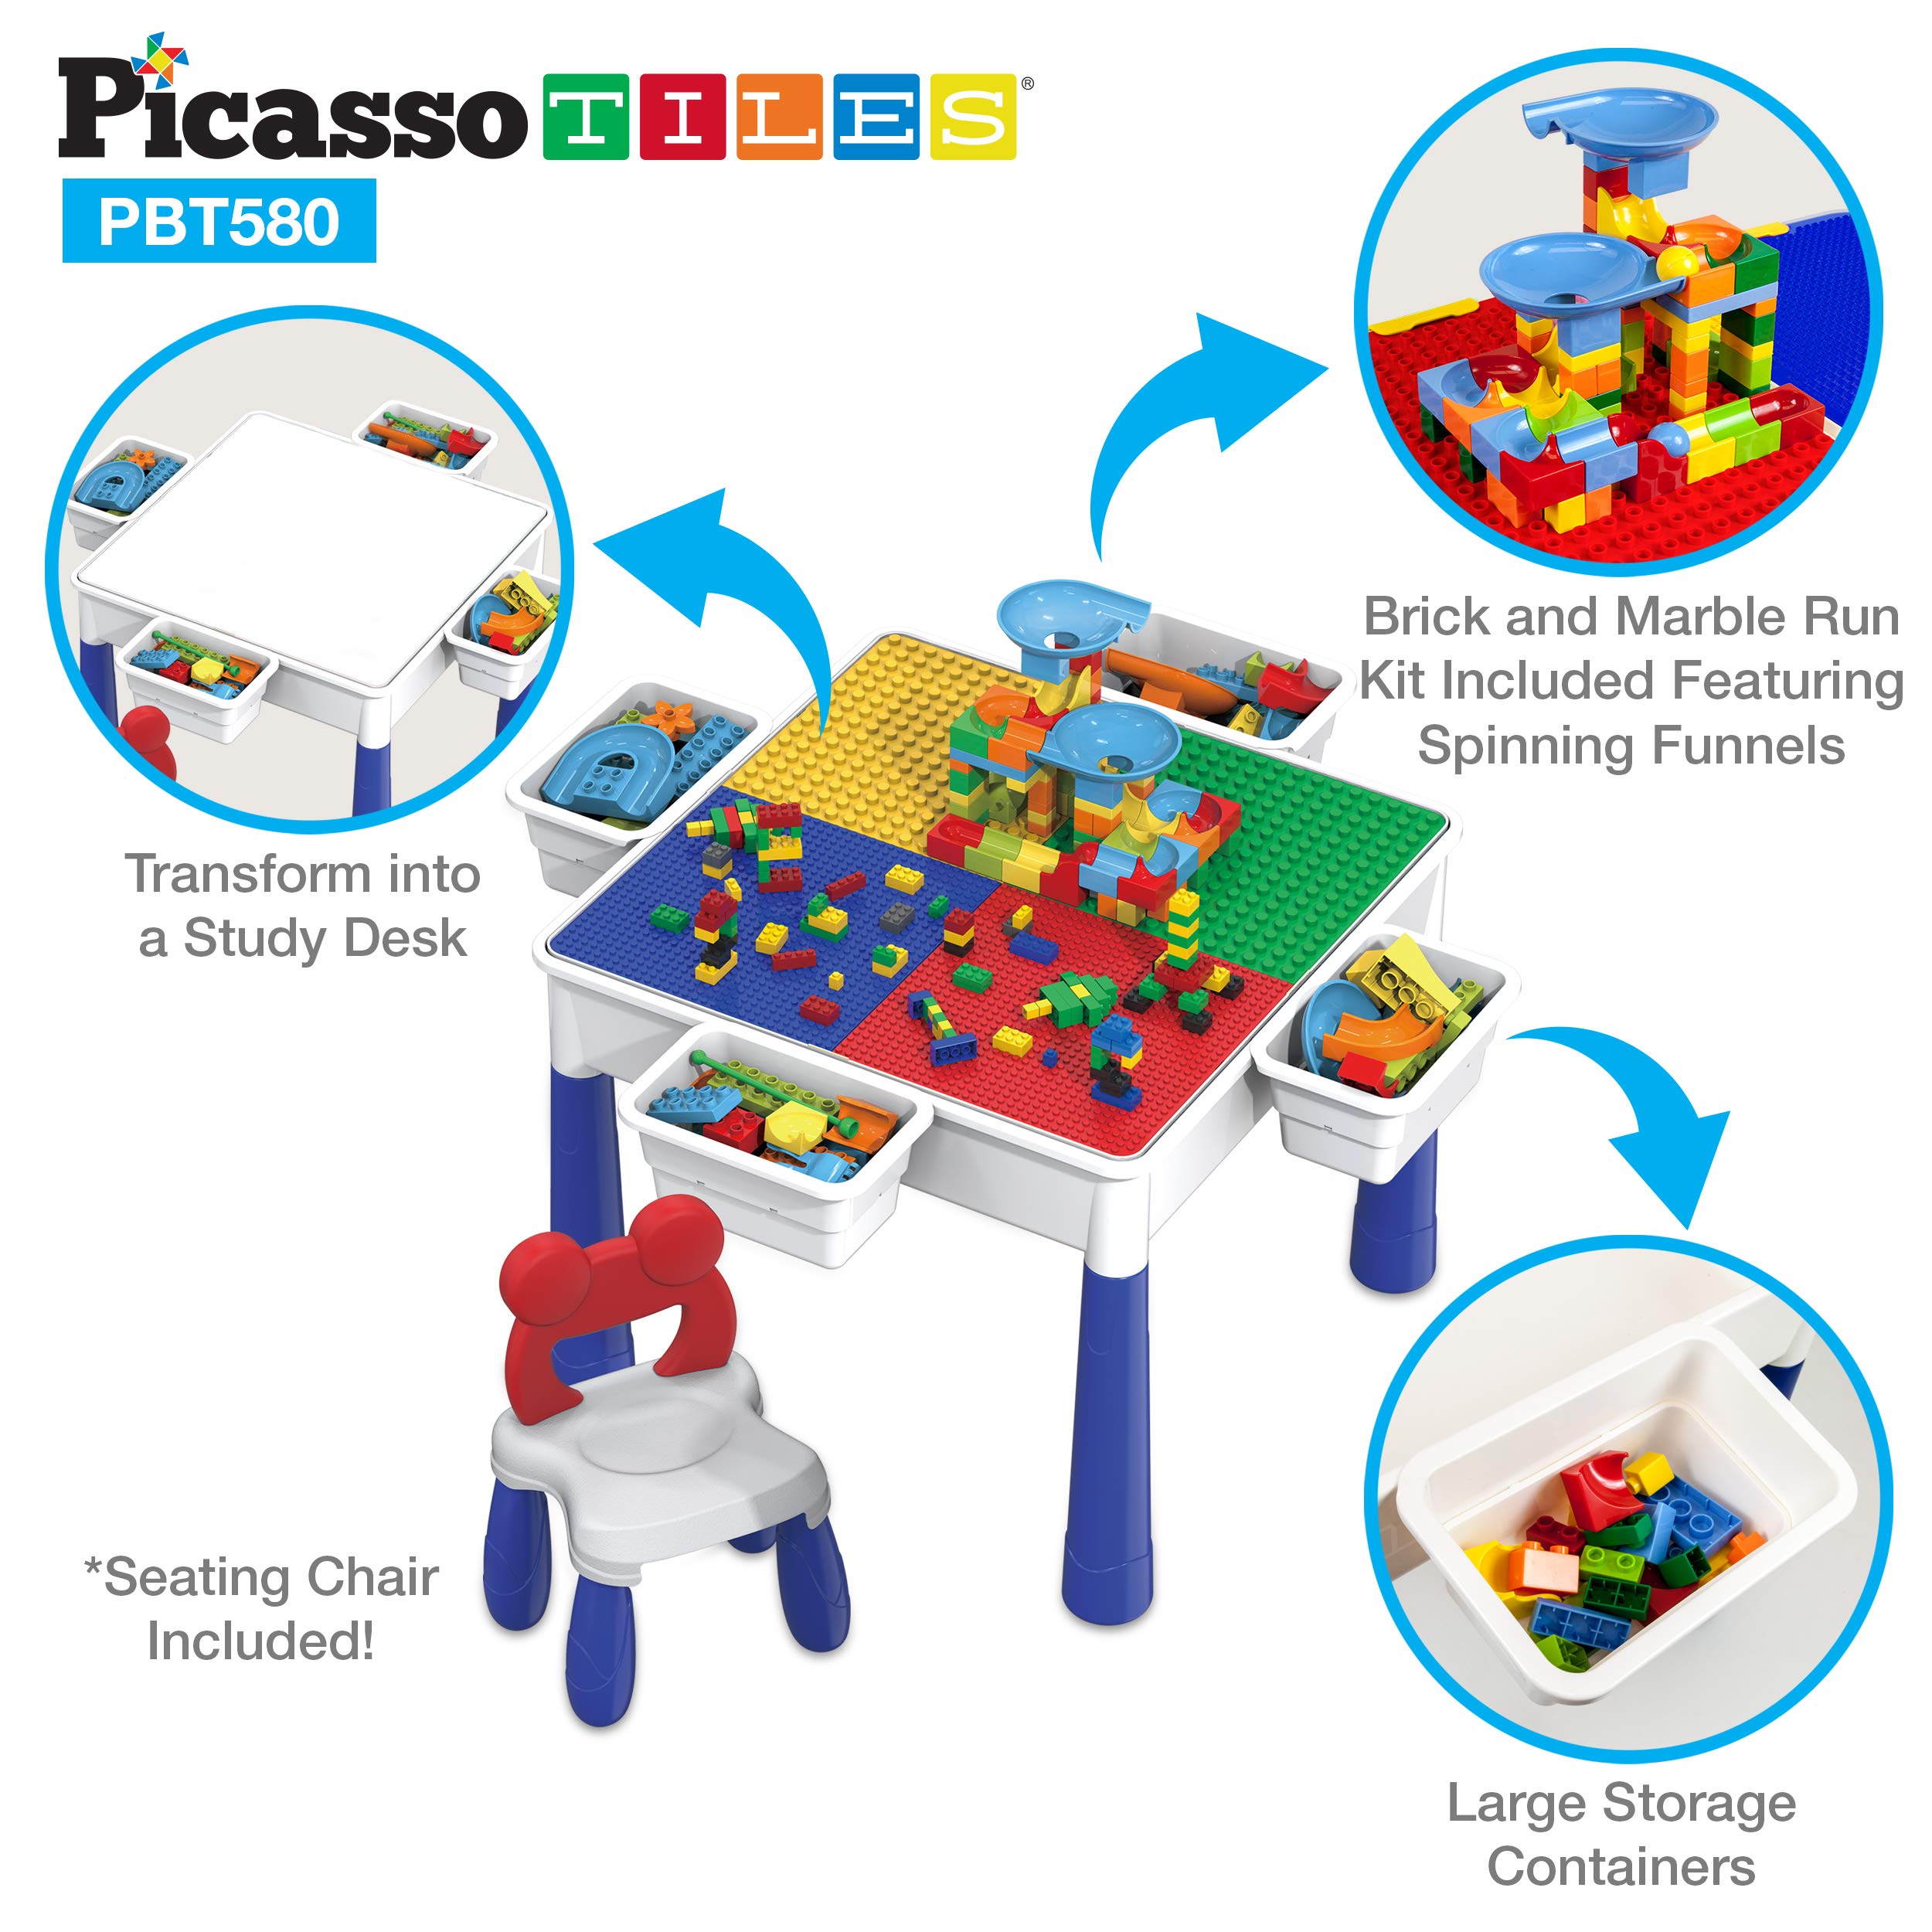 PicassoTiles Magnetic Drawing Board + Table Chair Set with Storage, 12x10 inch Large 748 Bead Magnet Tablet Pad Erasable Reusable Writing Playboard, 581pcs All-in-1 Building Blocks and Marble Run